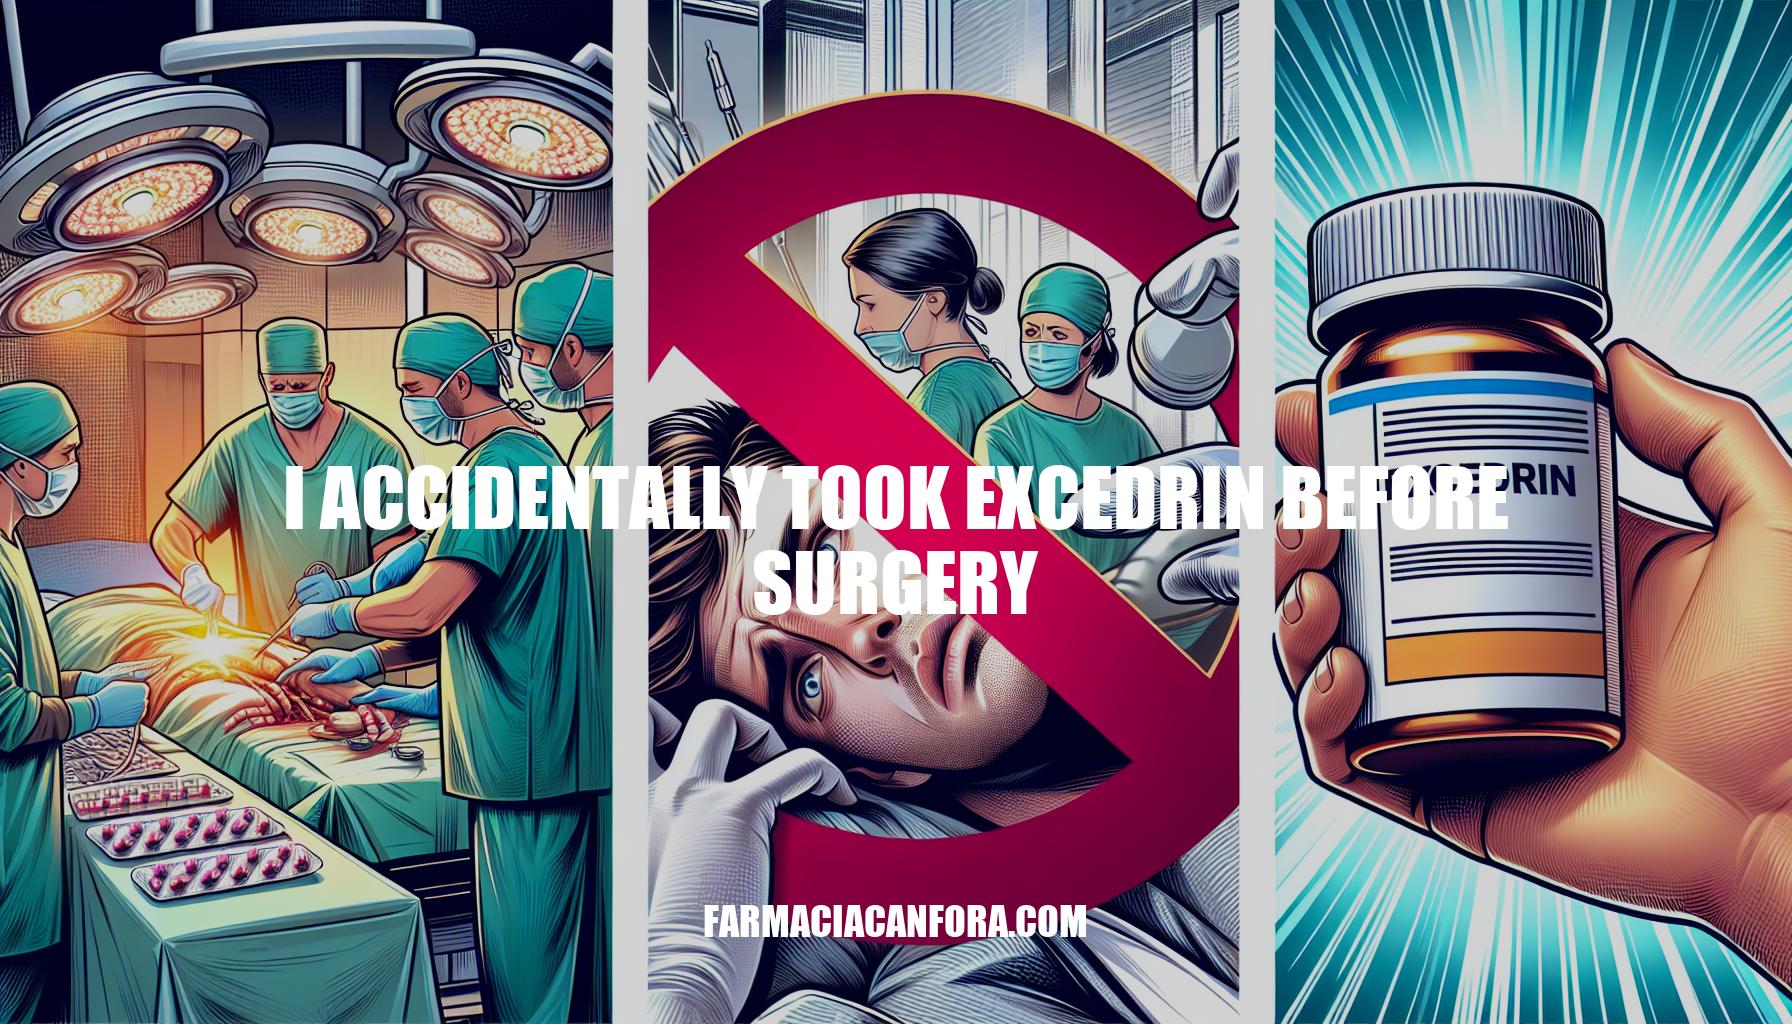 What to Do if I Accidentally Took Excedrin Before Surgery